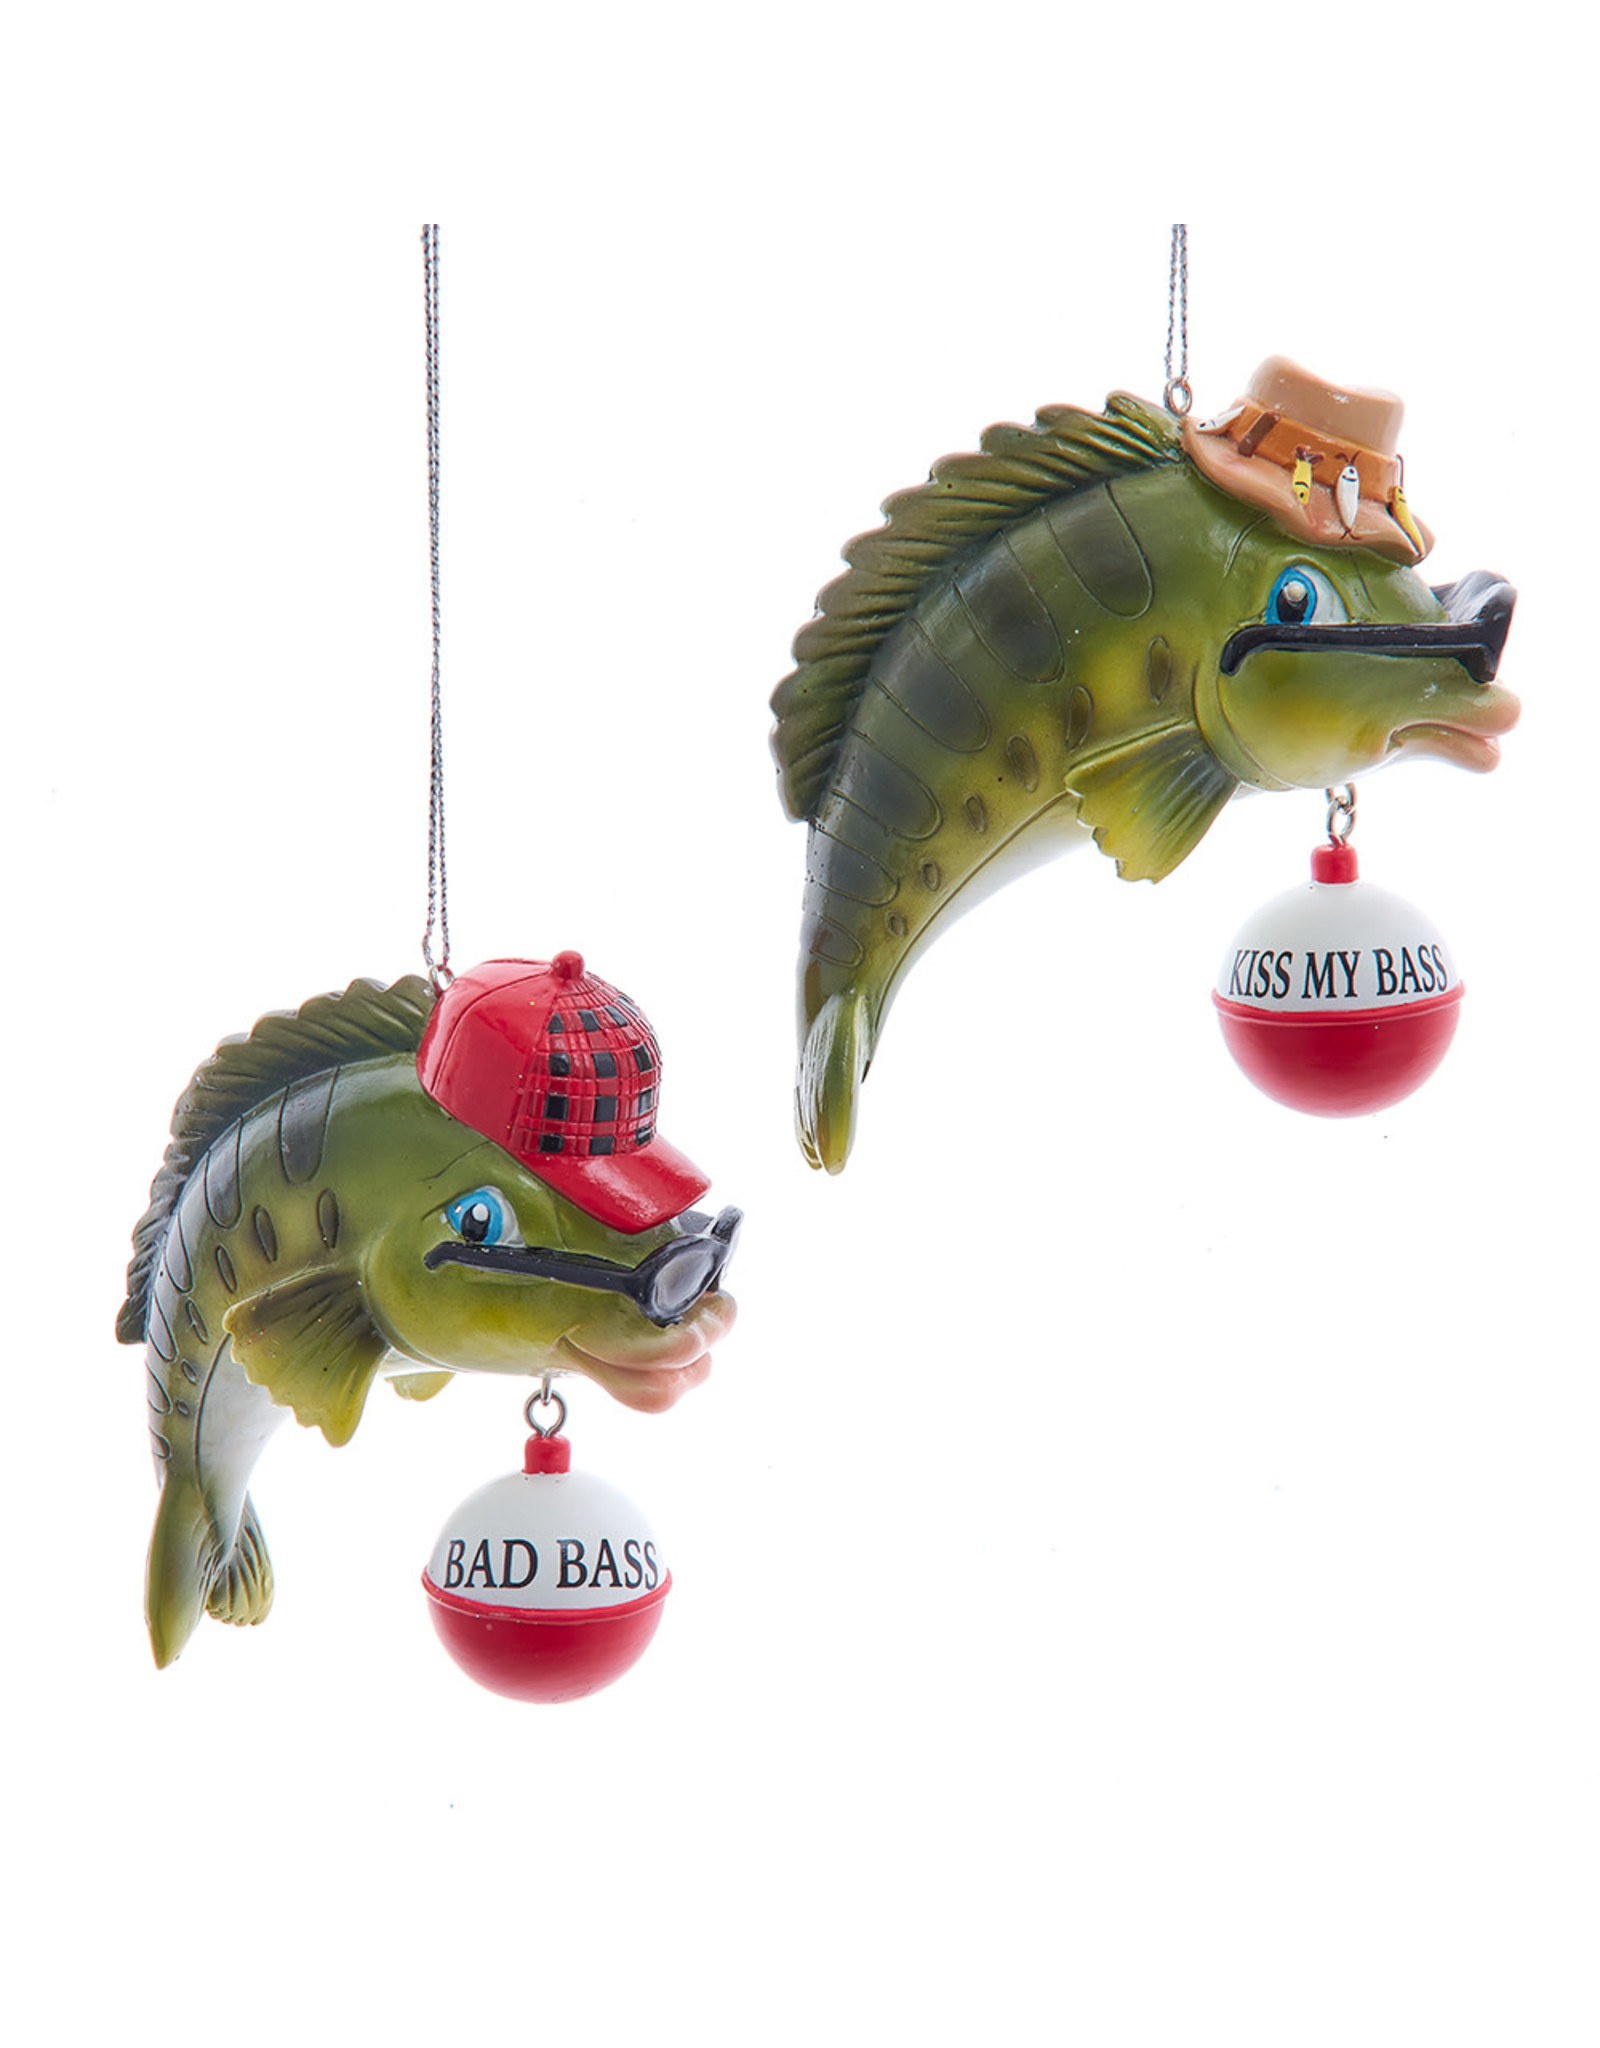 Kurt Adler Lodge Bass With Sayings Ornaments Set of 2 Assorted